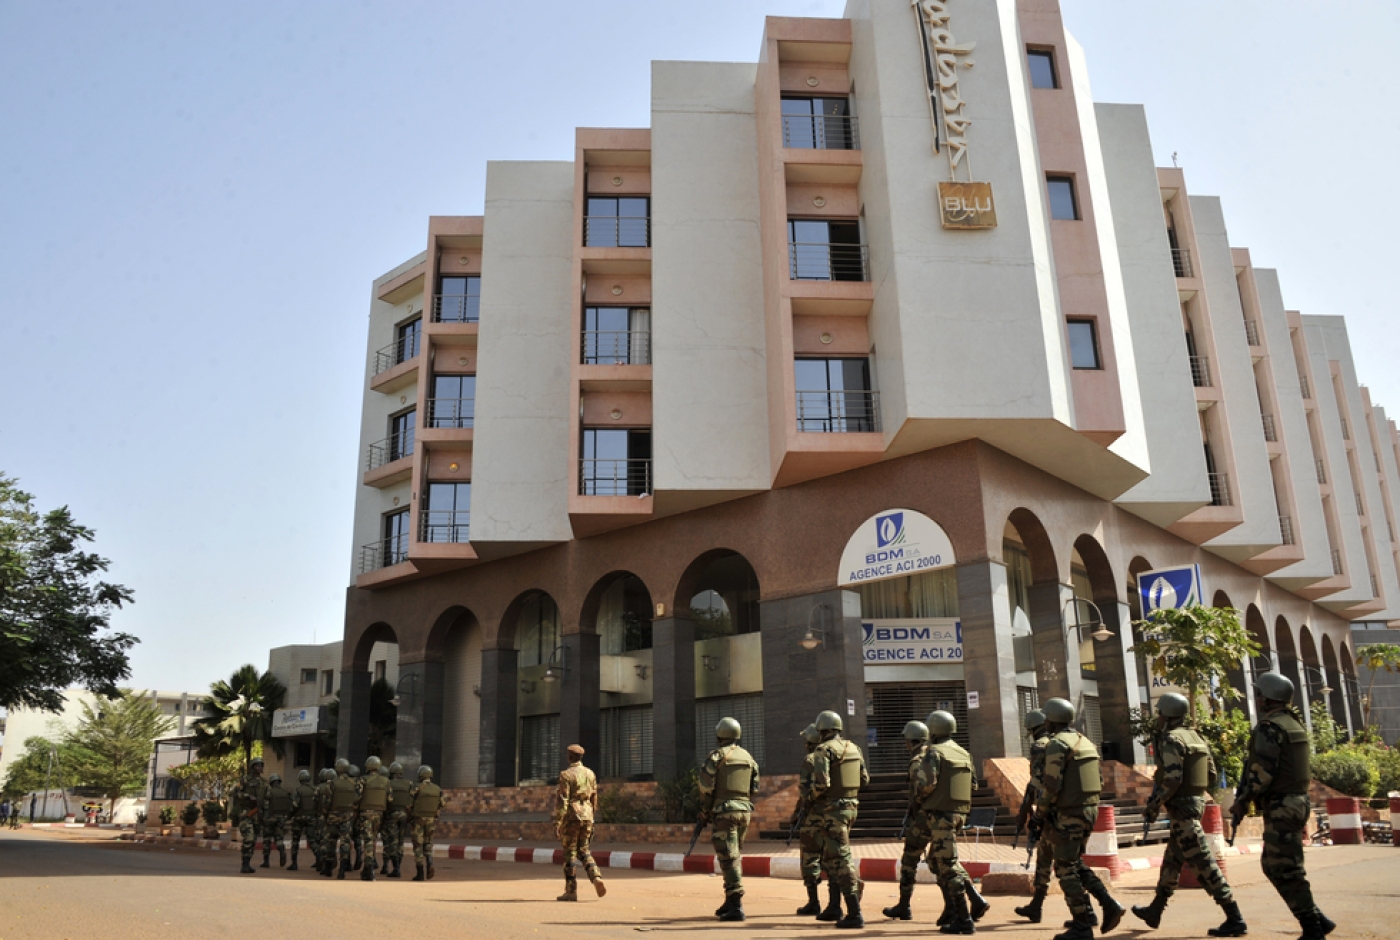 Malian authorities hunt for hotel assailants | Middle East Eye édition ...